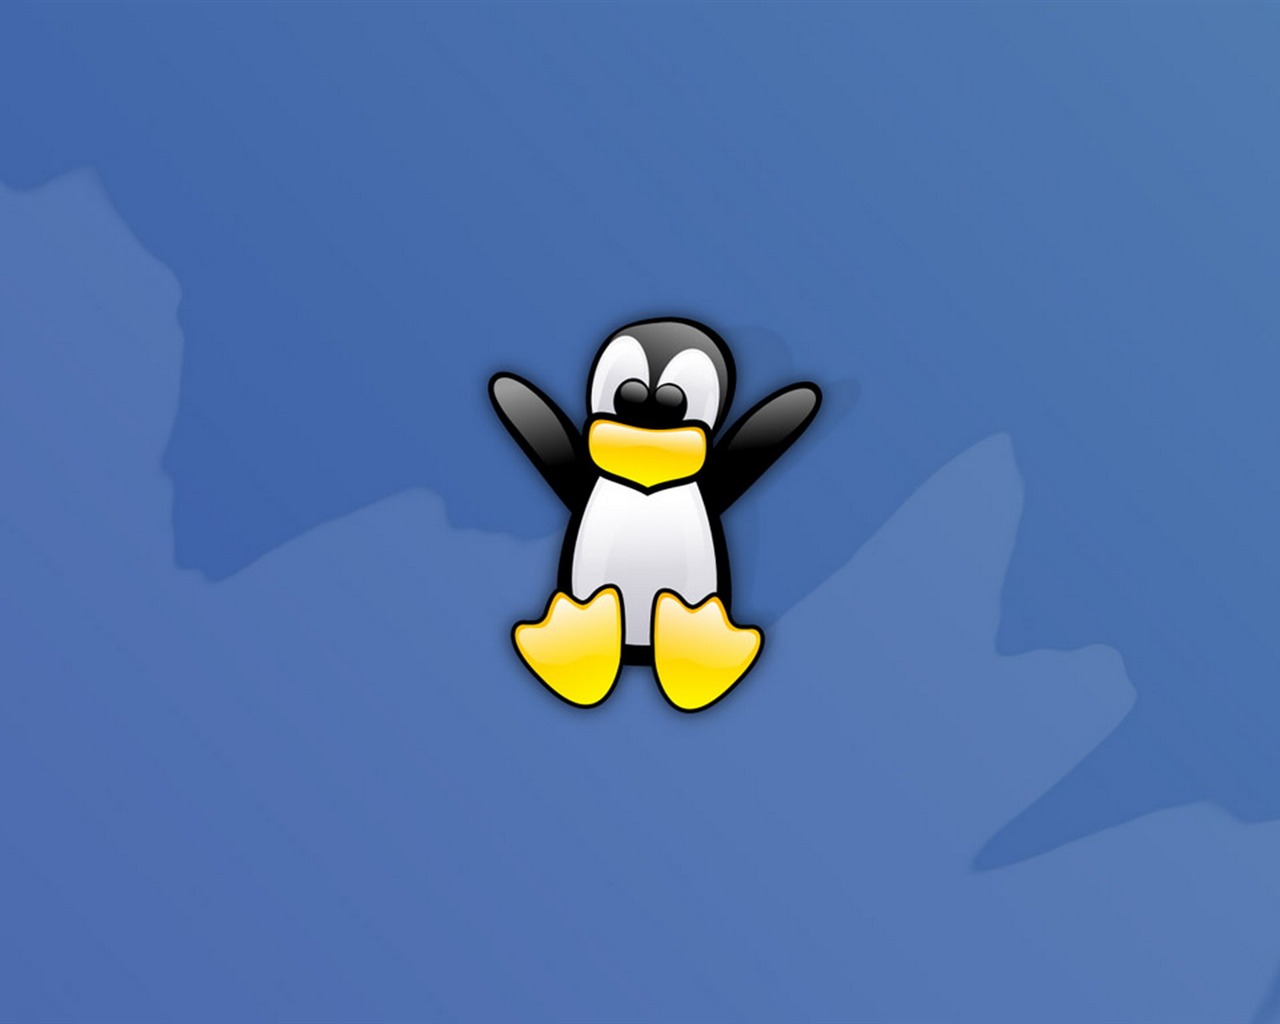 Linux tapety (2) #18 - 1280x1024